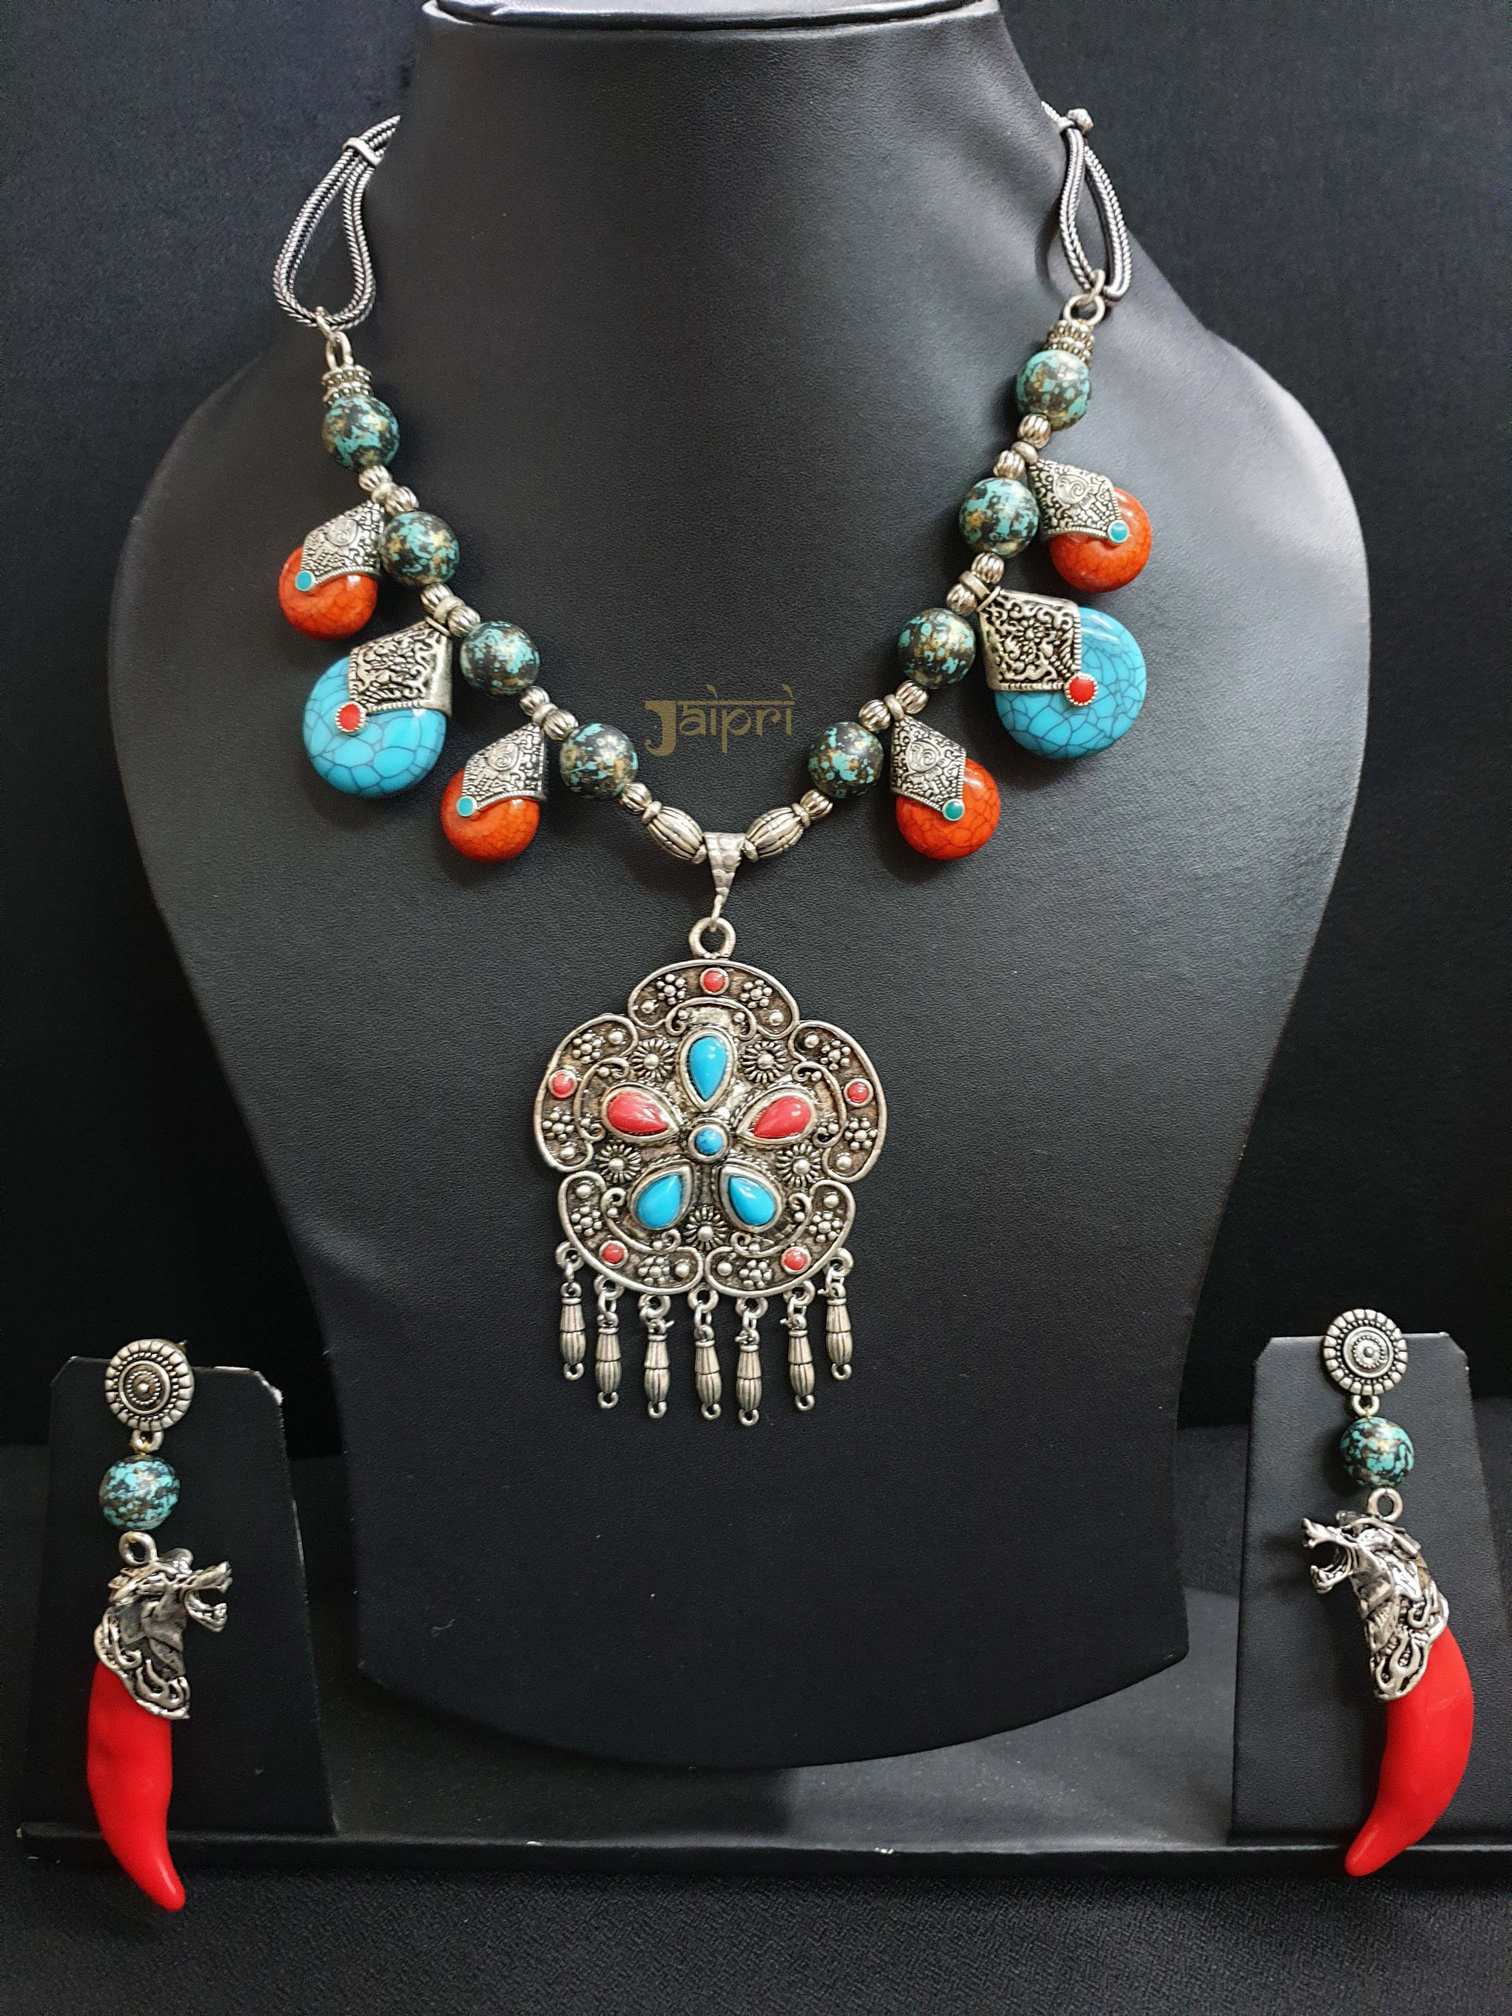 Antique Multicolor Stone, Oxidized Floral Necklace With Earrings